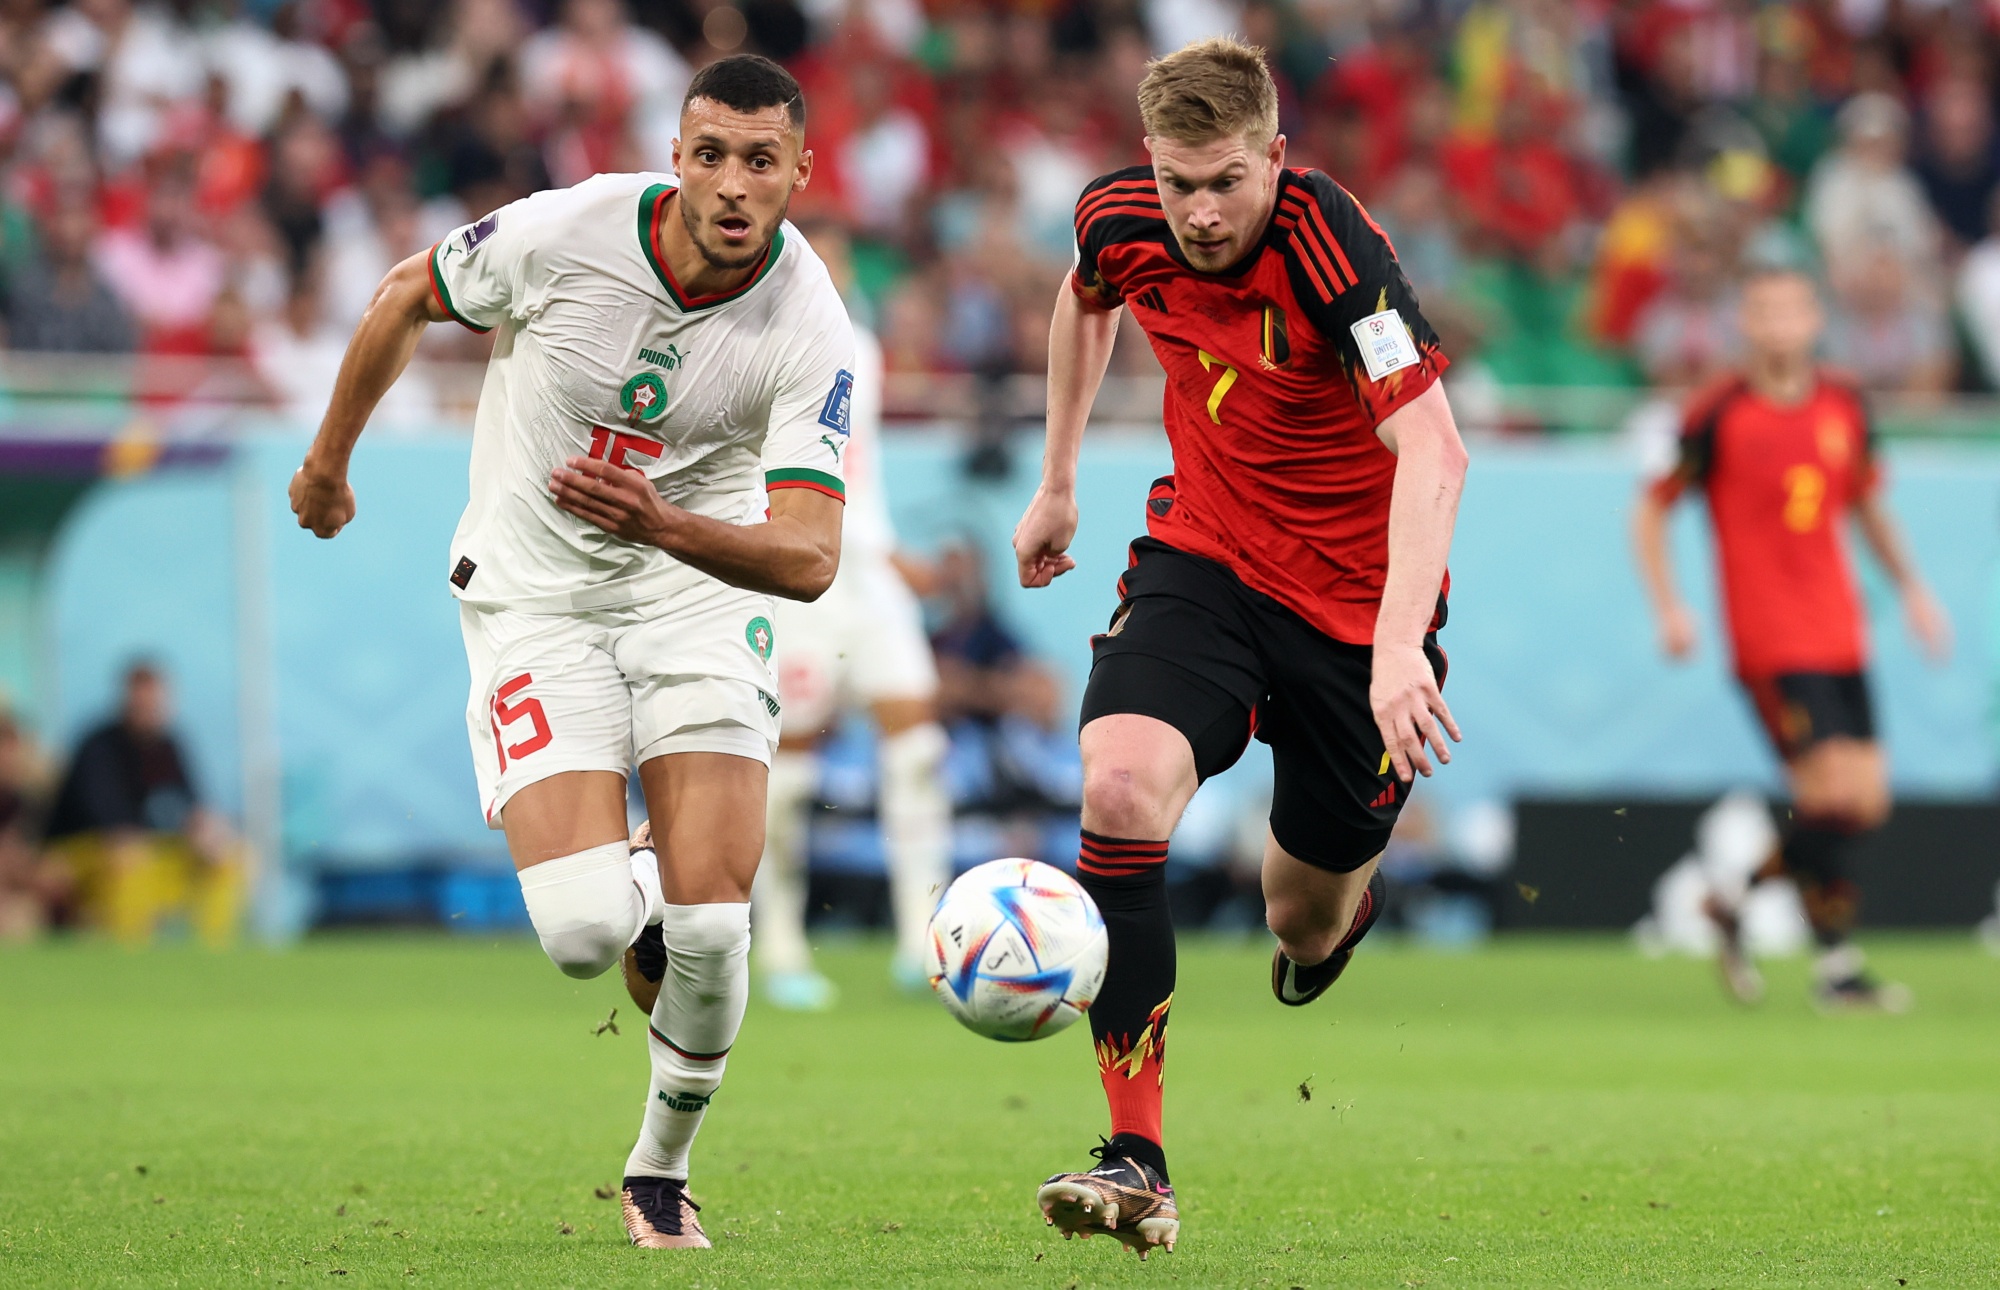 LIVE FEED - Action pictures from a soccer game between Belgium's national team the Red Devils and Morocco, in Group F of the FIFA 2022 World Cup in Al Thumama Stadium, Doha, State of Qatar on Sunday 27 November 2022. BELGA PHOTO BRUNO FAHY